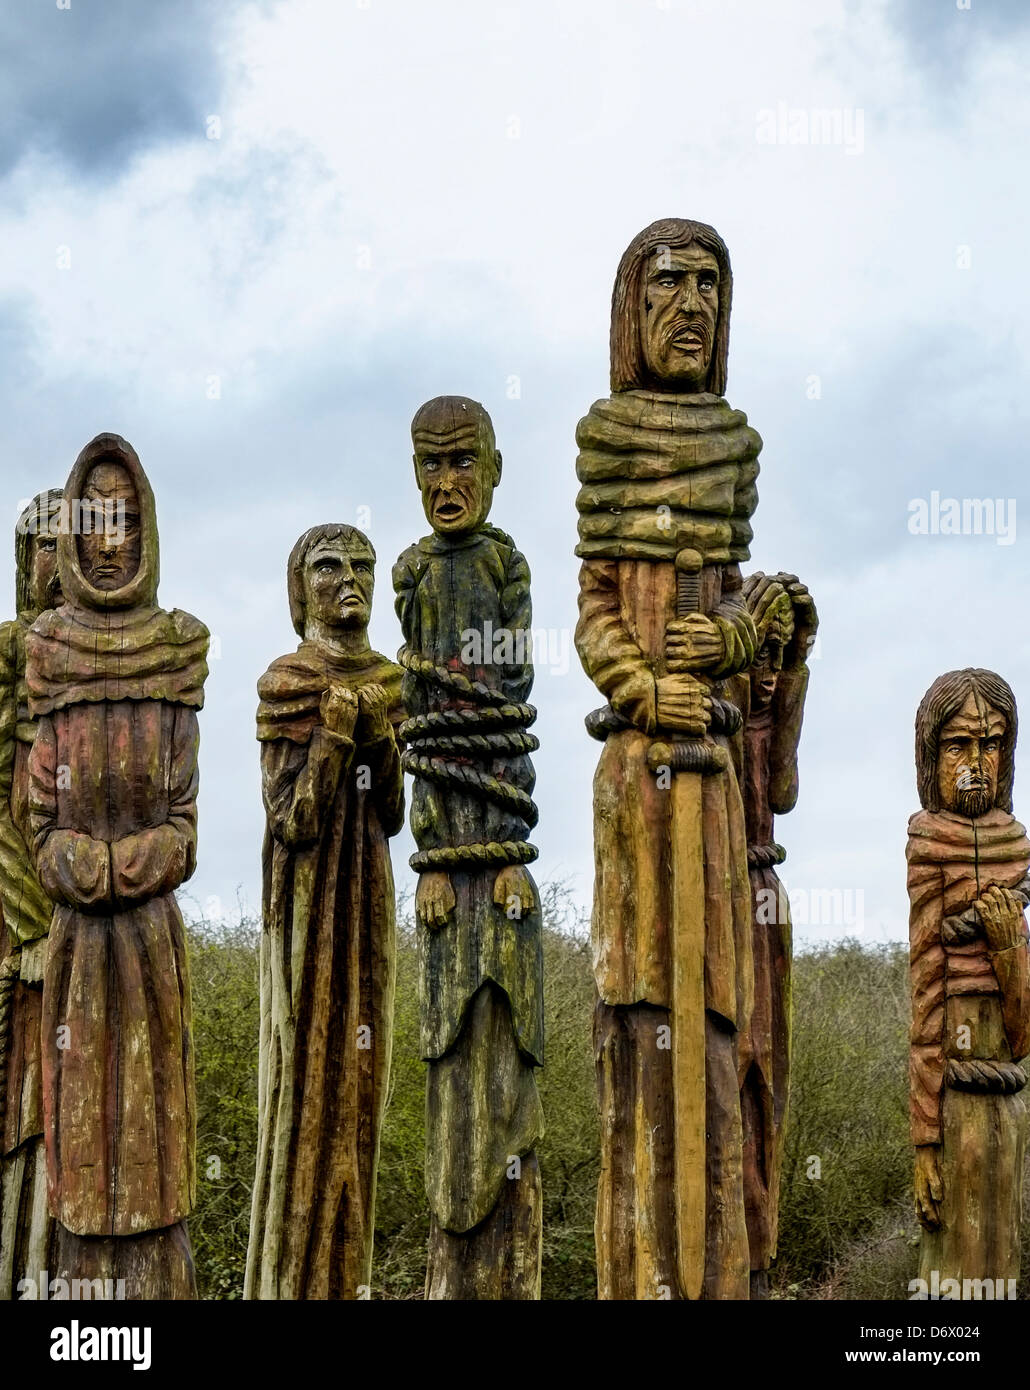 The sculpture 'After The Uprising' by Robert Koenig at Wat Tyler Country Park in Piste in Essex. Stock Photo